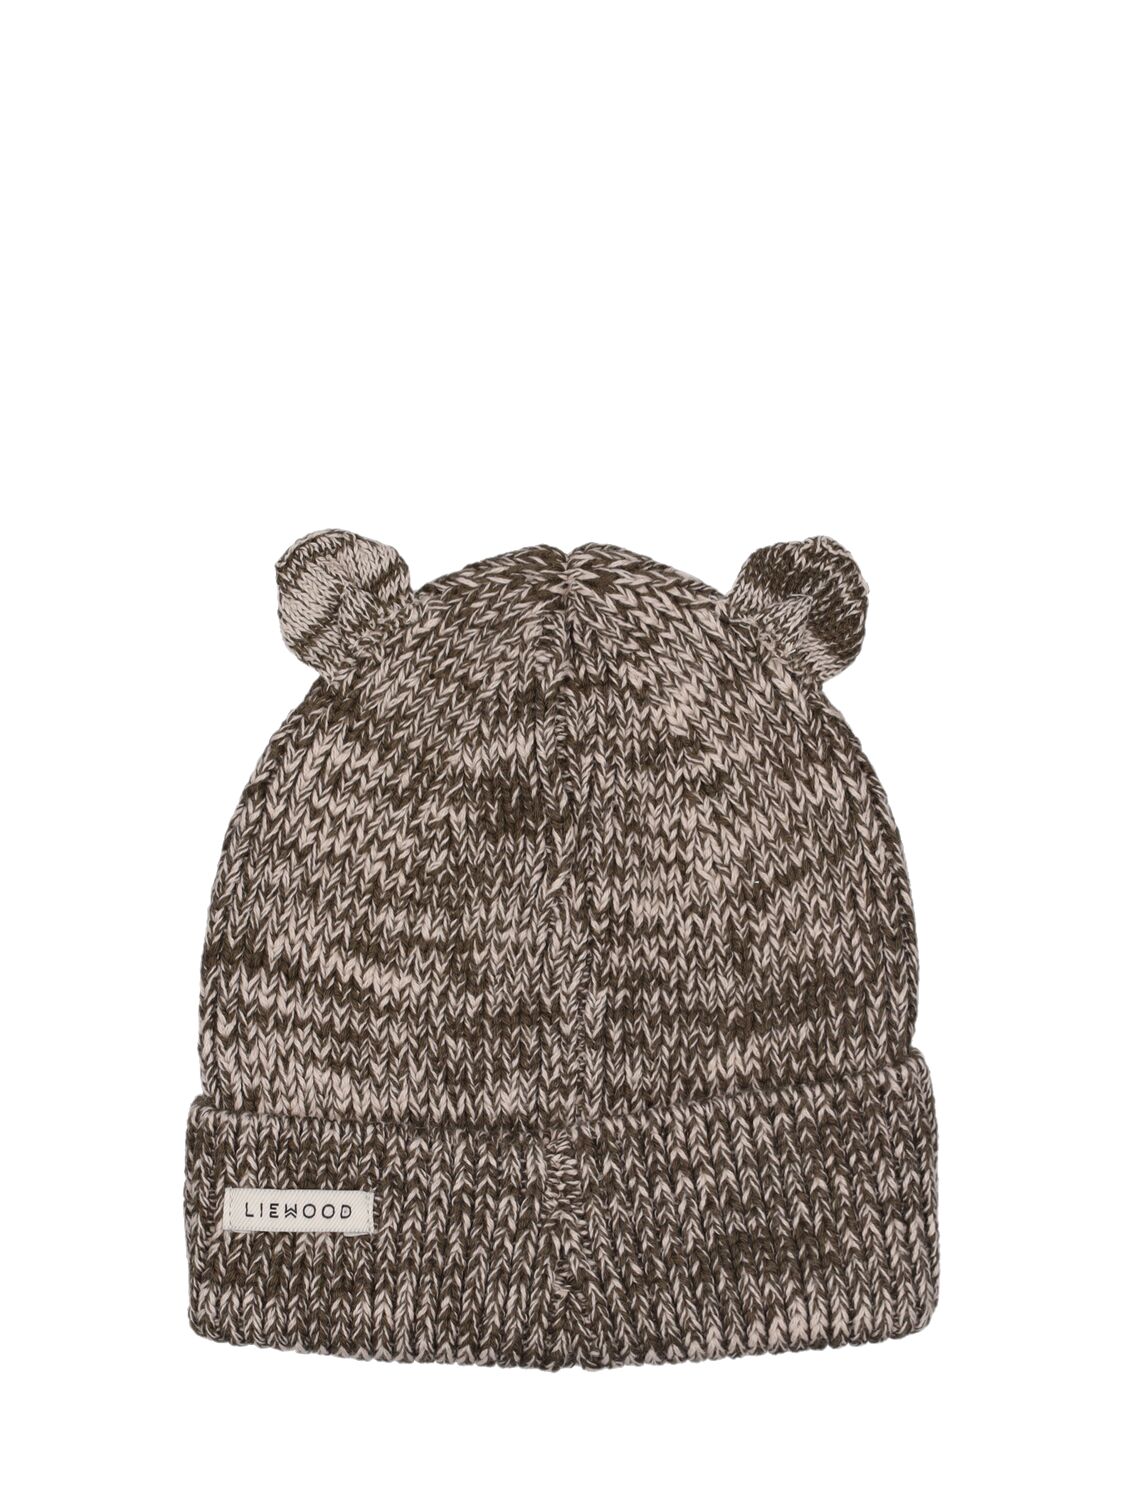 Image of Organic Cotton Knit Hat W/ Ears